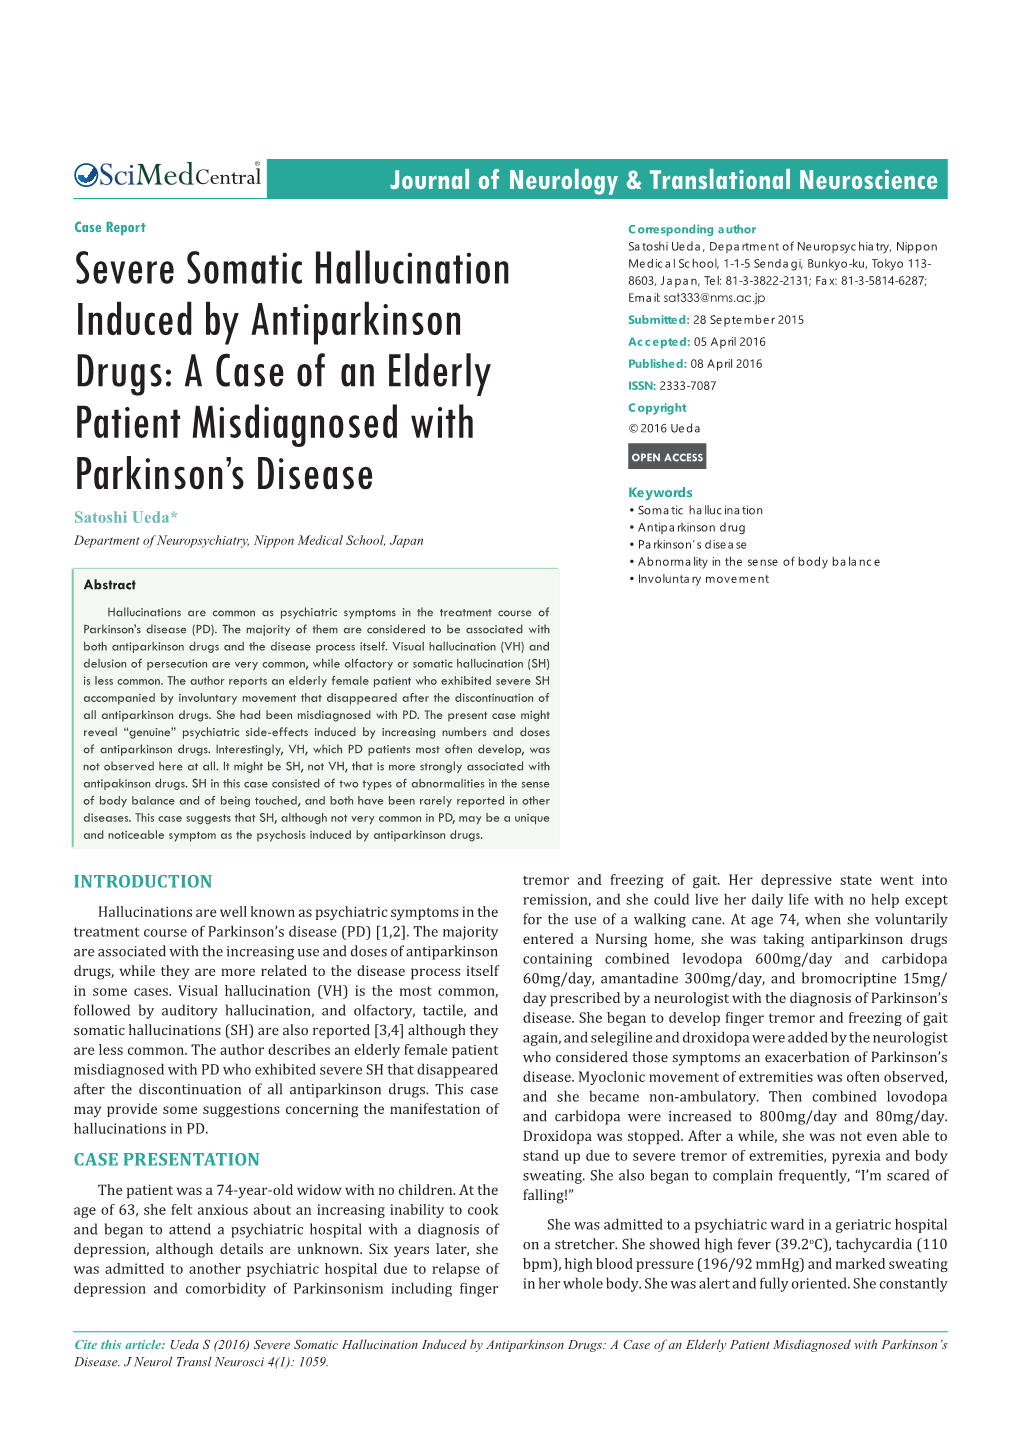 Severe Somatic Hallucination Induced by Antiparkinson Drugs: a Case of an Elderly Patient Misdiagnosed with Parkinson’S Disease